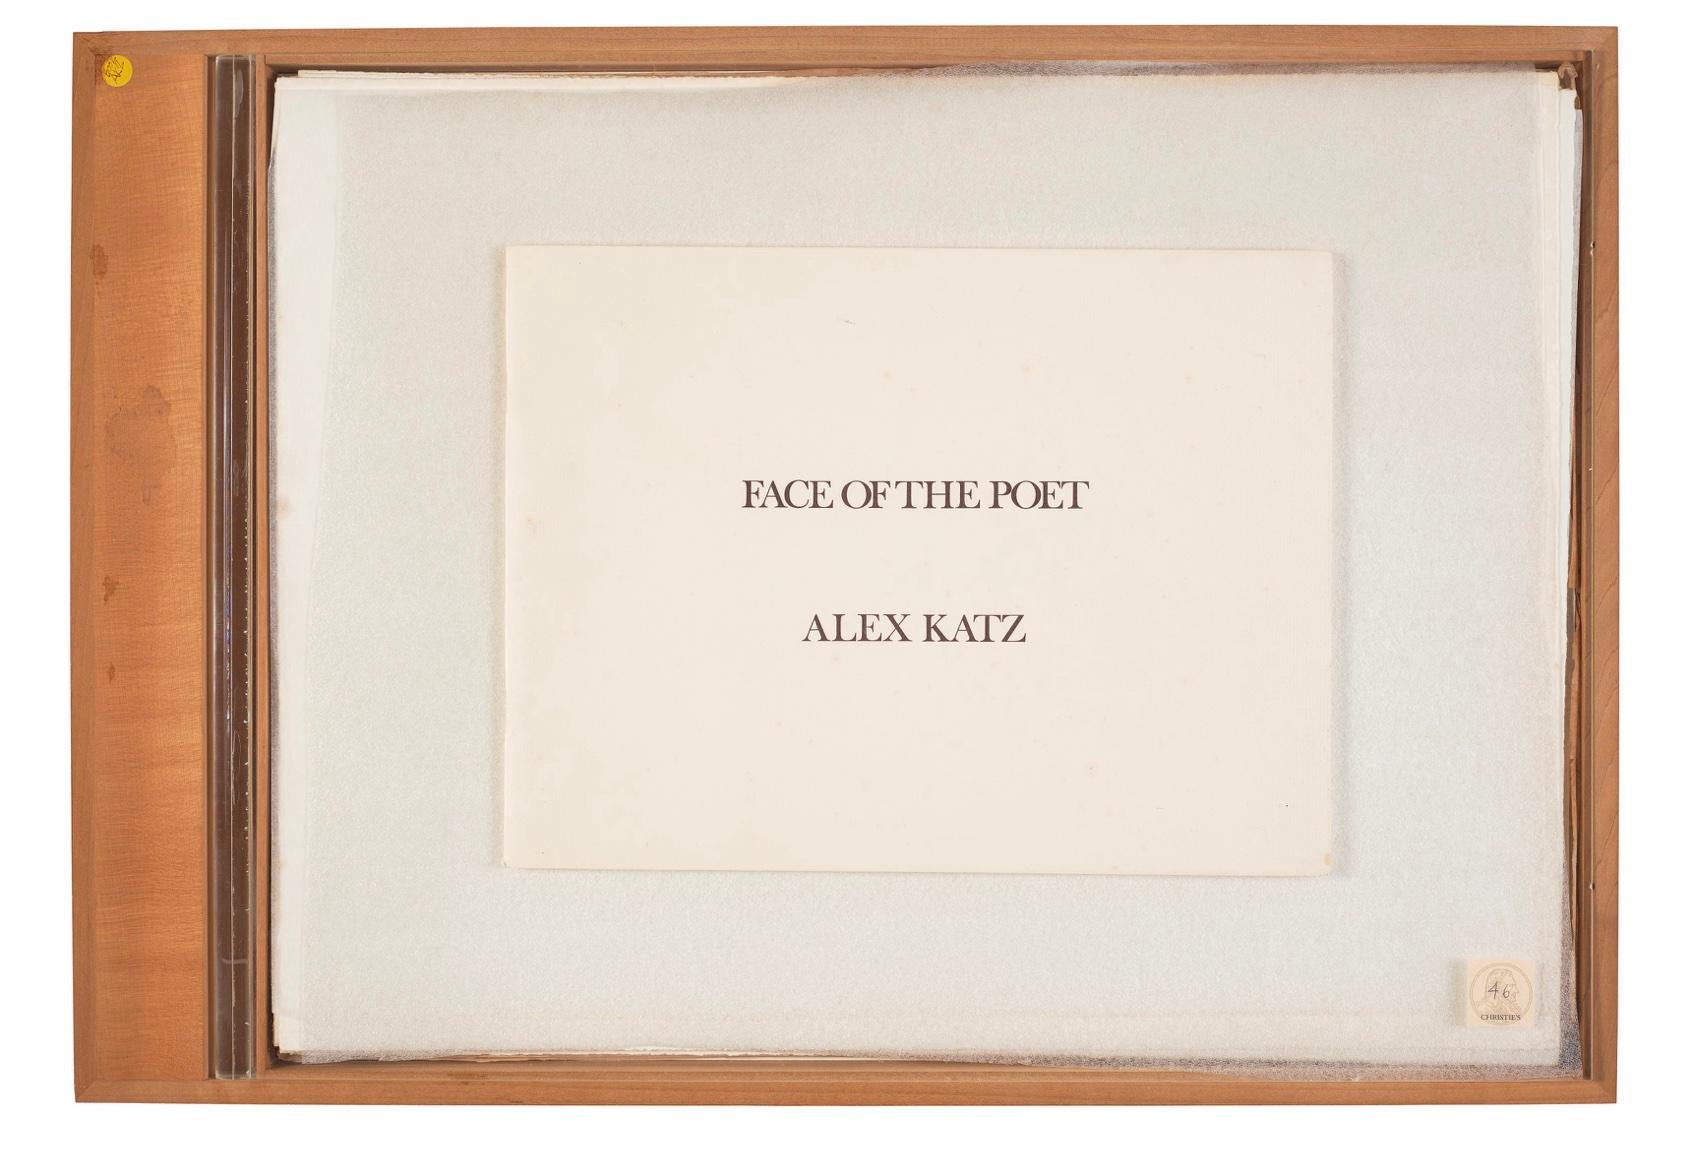 ALEX KATZ (1927-Present)

This rare Alex Katz 'Face of the Poet' album is the complete set of fourteen aquatints in colors, on J. Green Hotpress paper. Conceived in 1978, each print is signed in pencil and numbered 13/25 (there were also ten